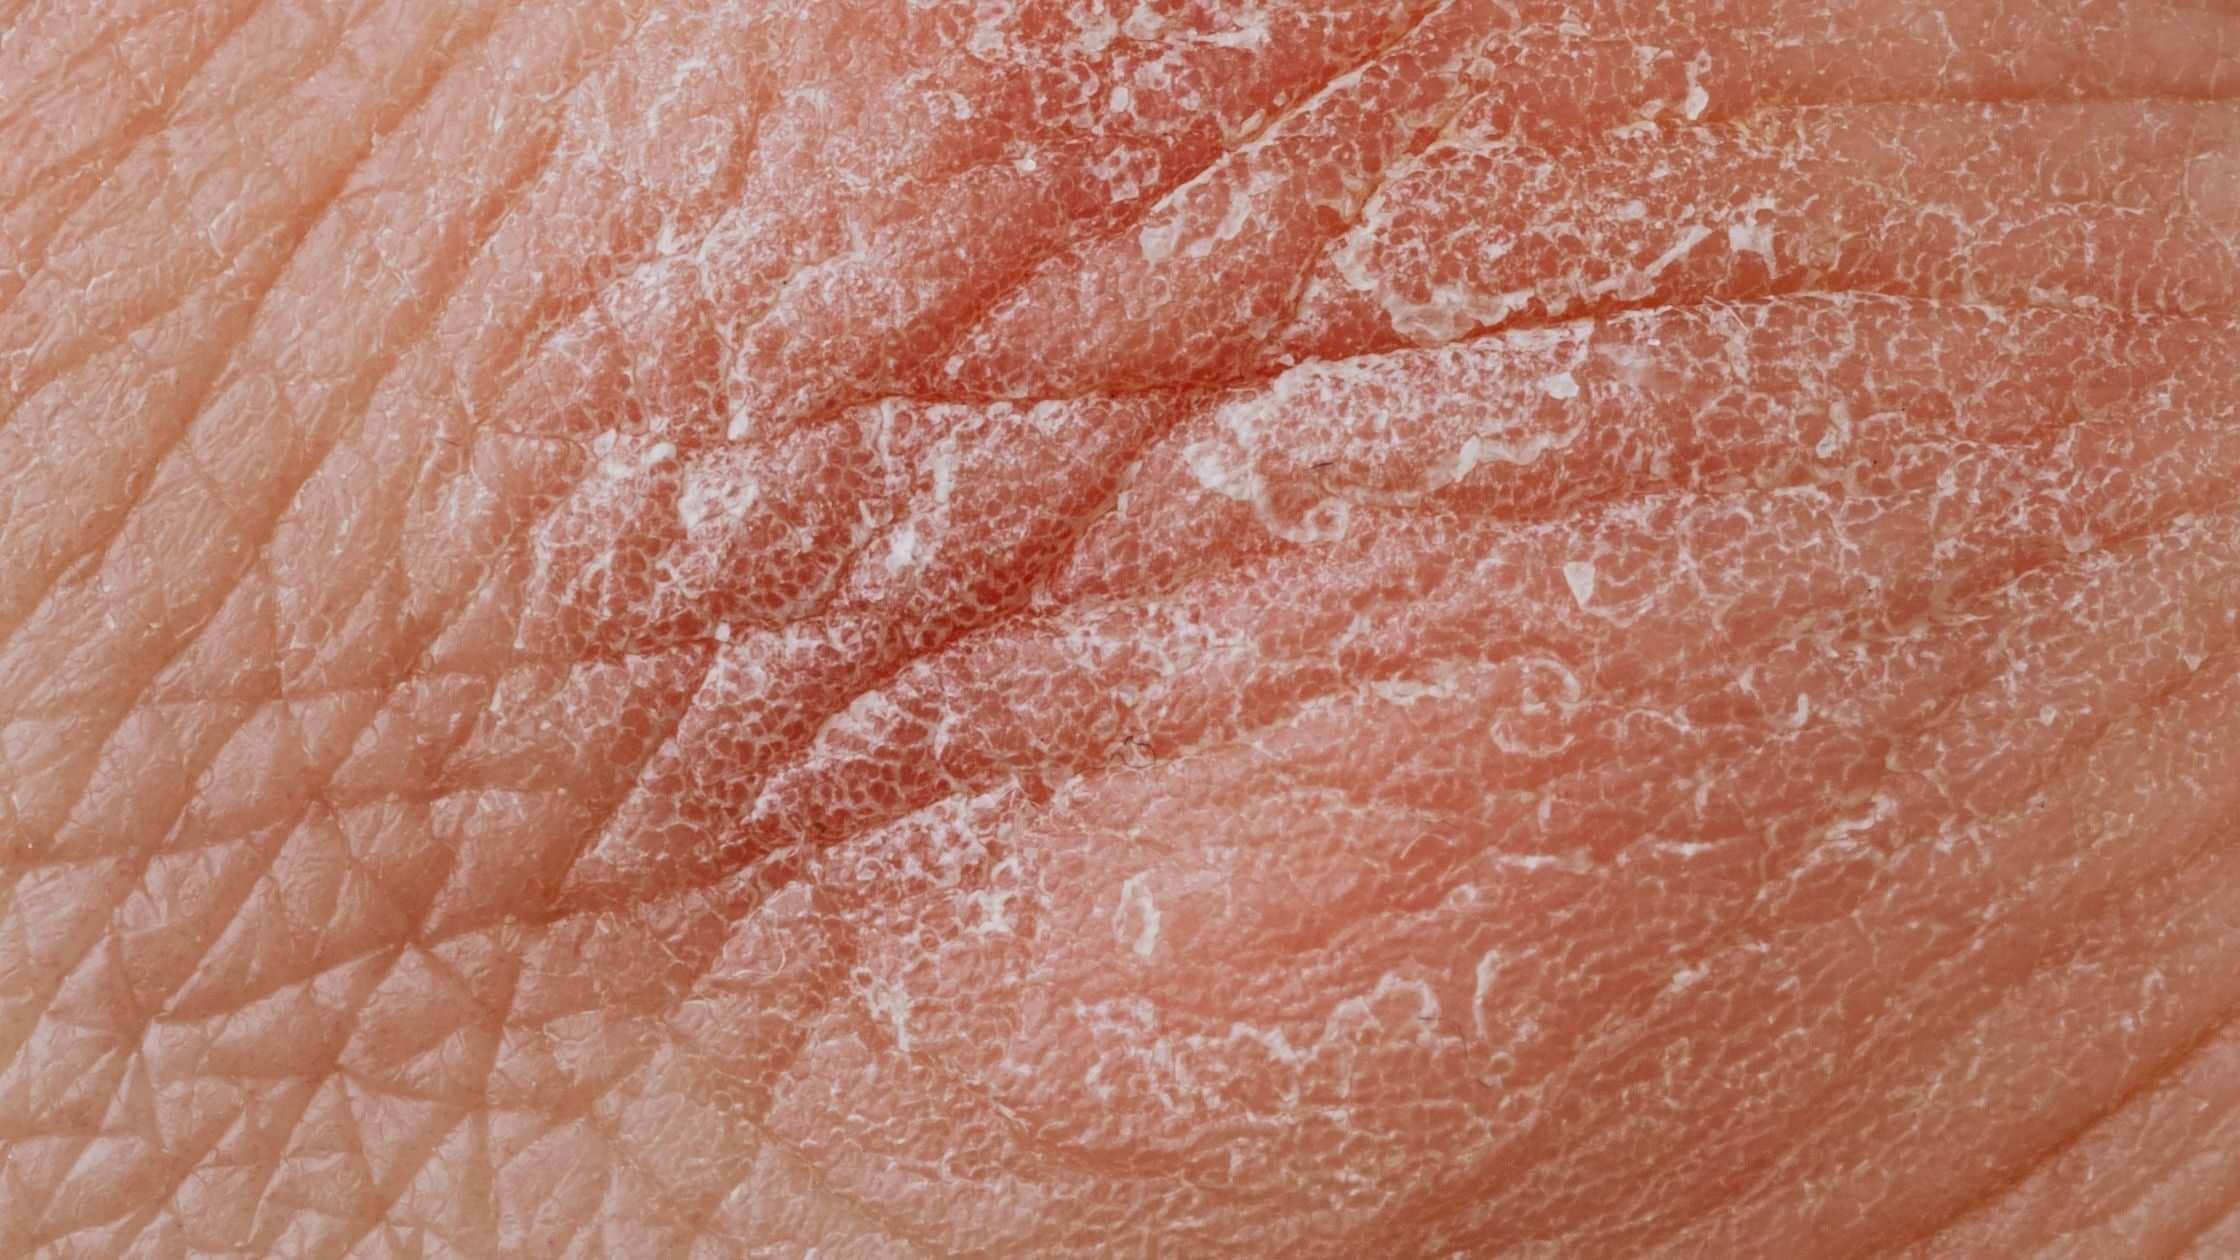 Is Psoriasis a Serious Skin Condition?